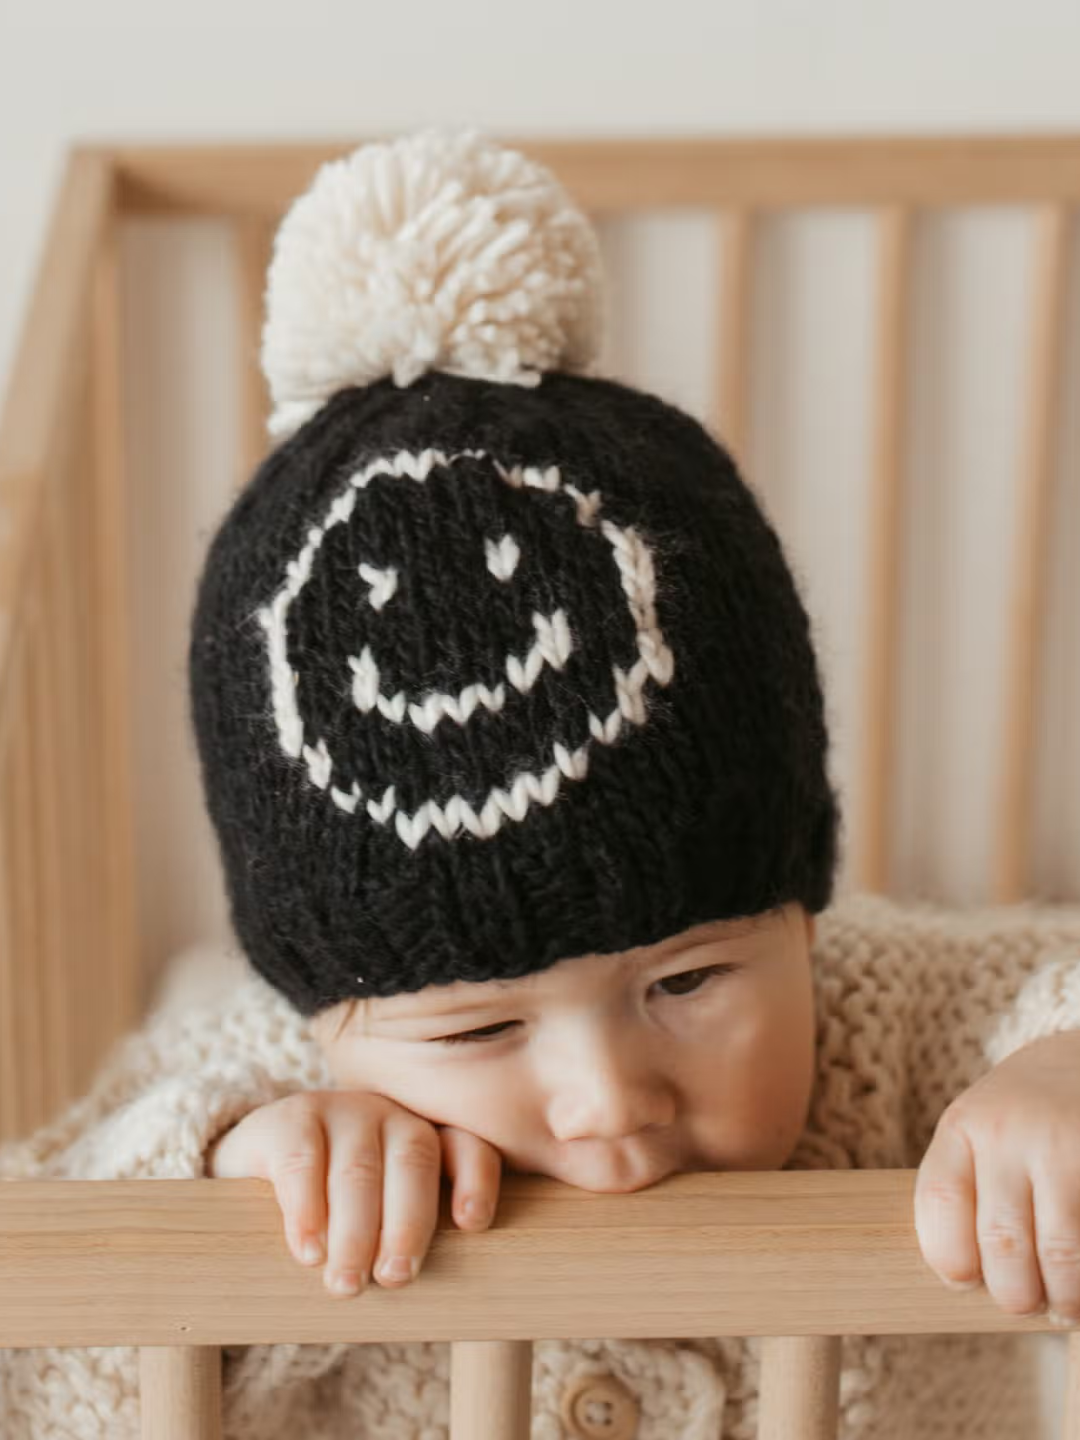 Baby wearing a black beanie hat in chunky yarn with an off-white smiley face on the front and an off-white pom-pom on top. The baby is show standing in a wooden crib, wearing a cream cardigan, and chewing the side of the crib.